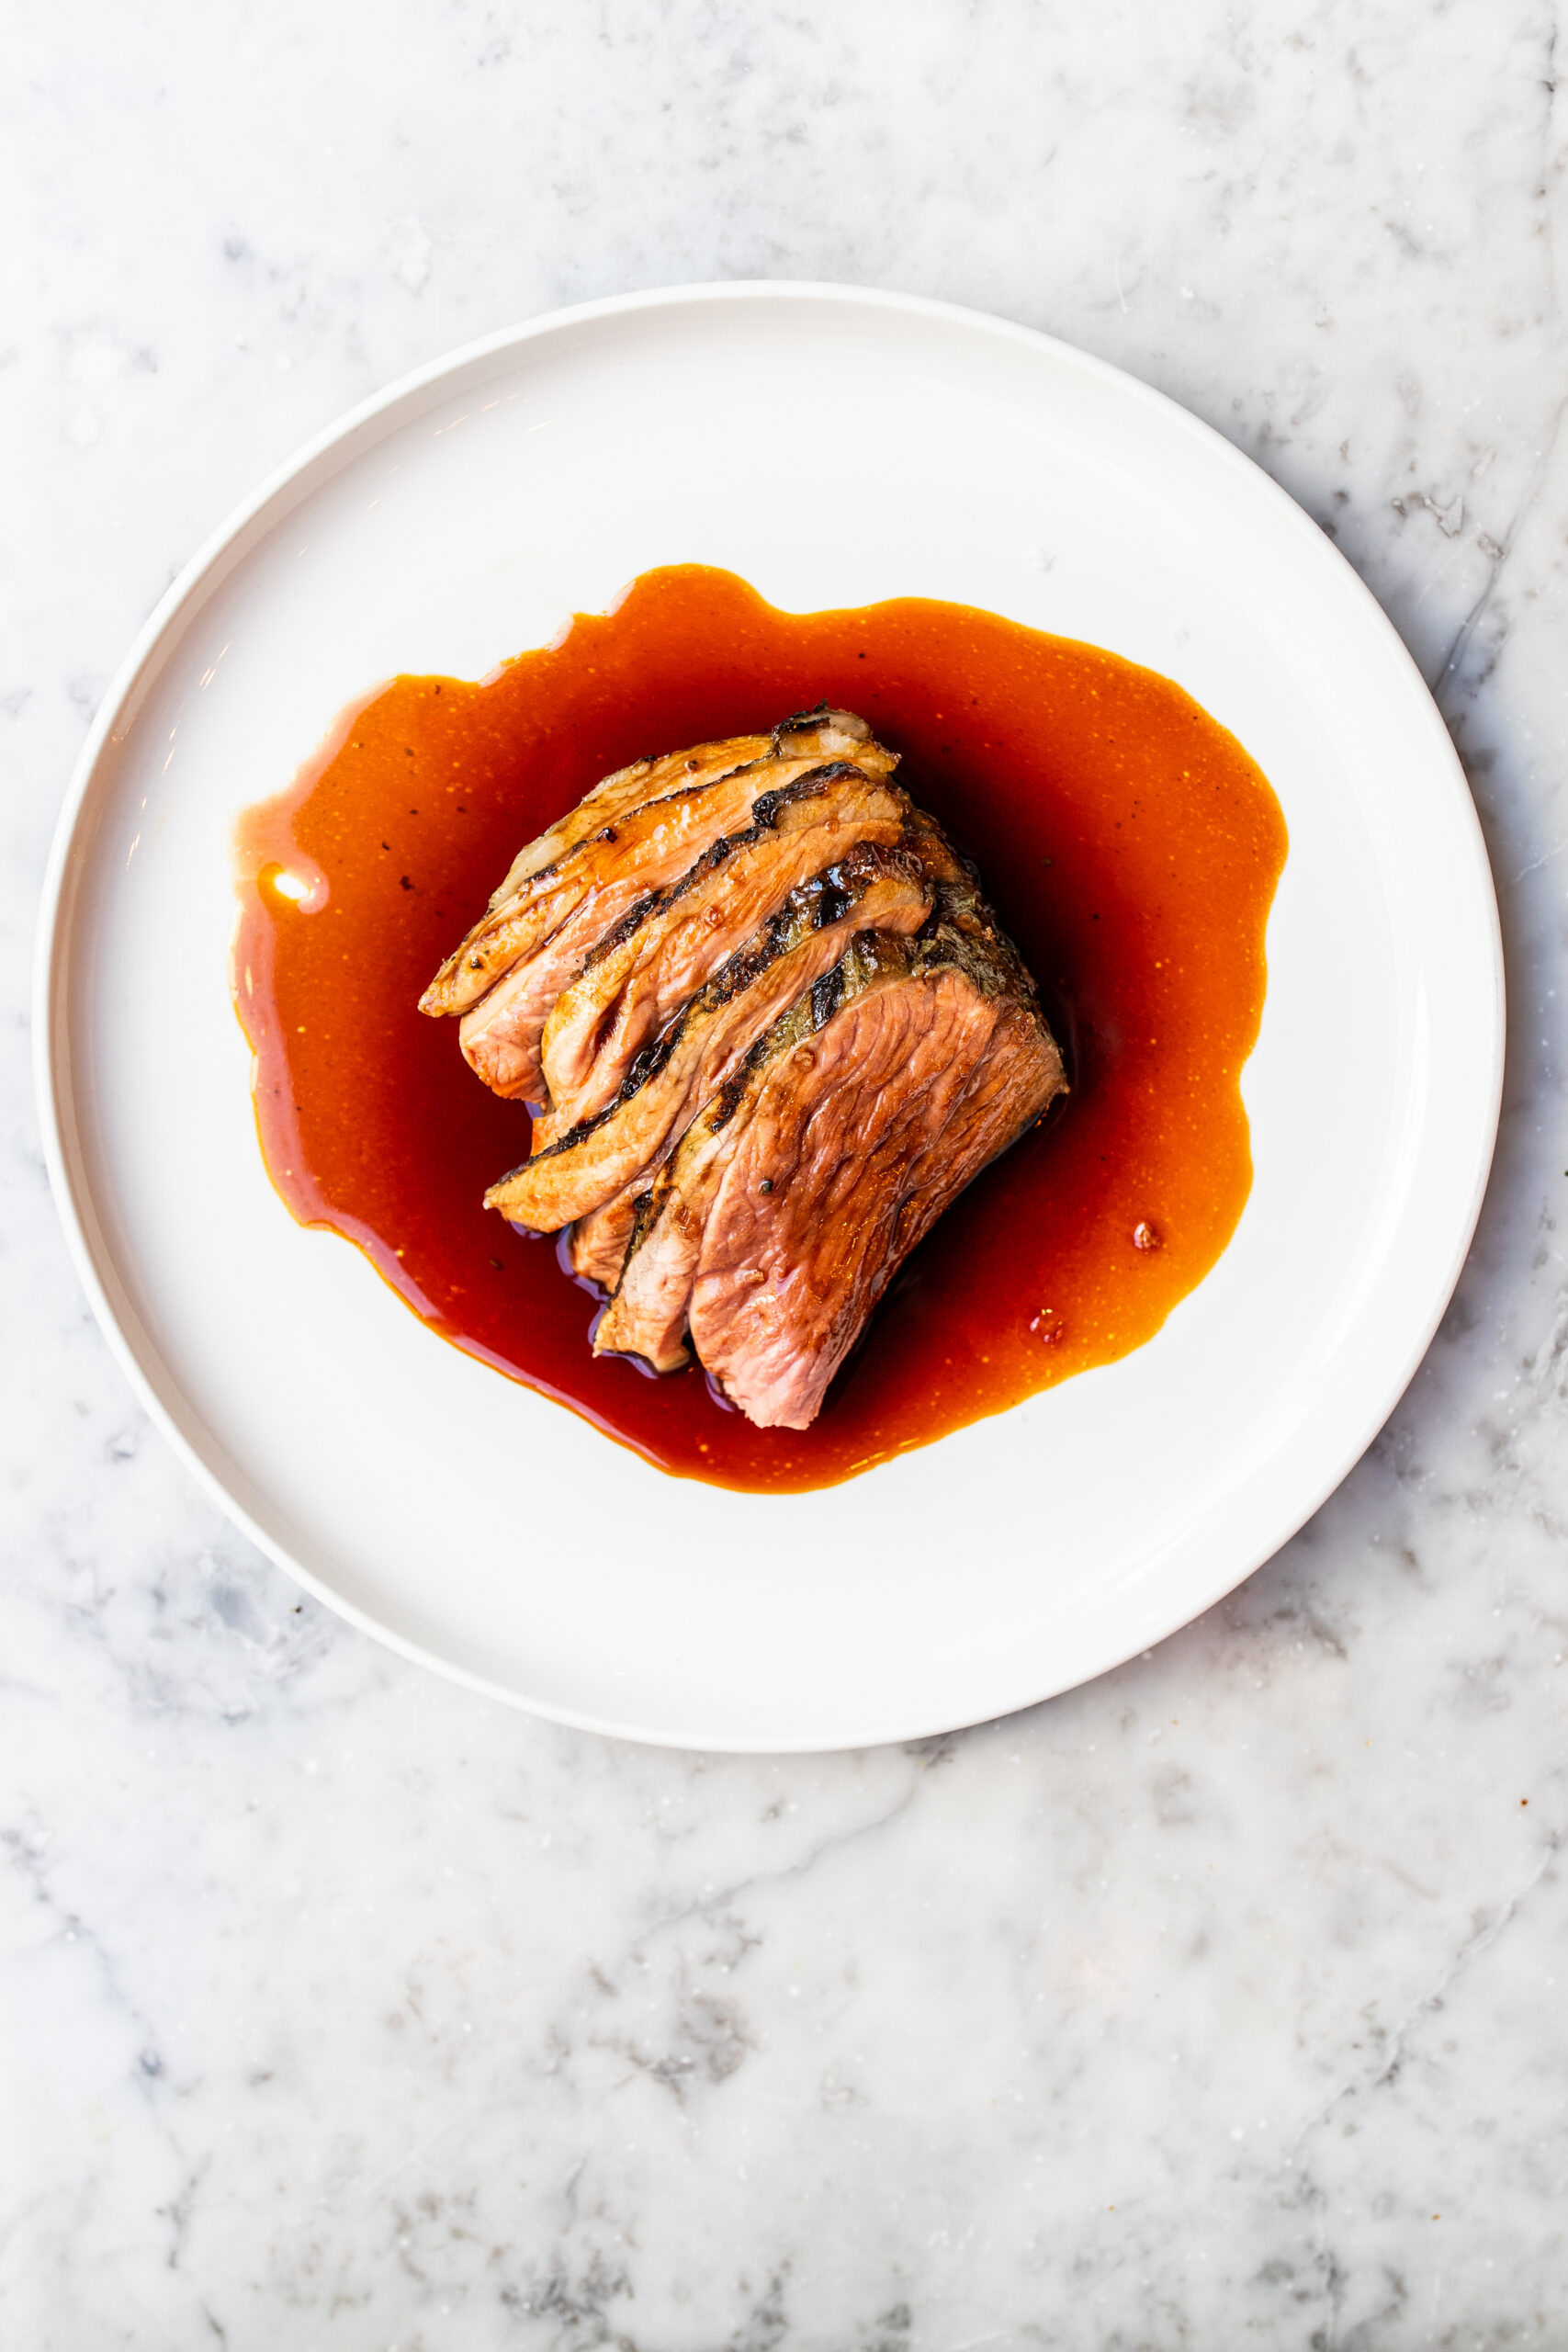 Overhead view of red wine sauce over a steak on a white plate and marble countertop